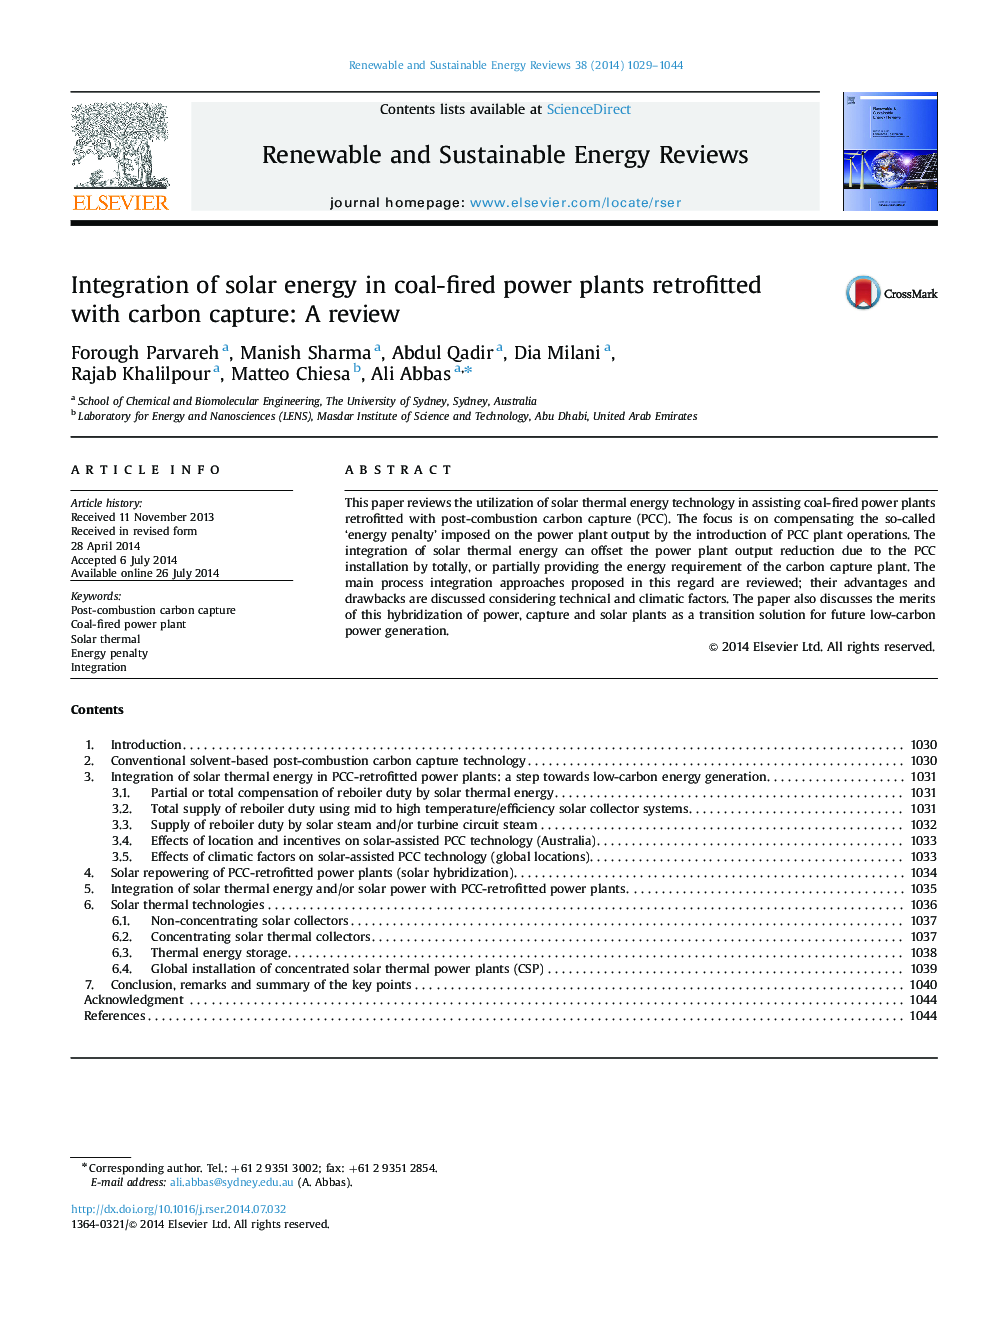 Integration of solar energy in coal-fired power plants retrofitted with carbon capture: A review